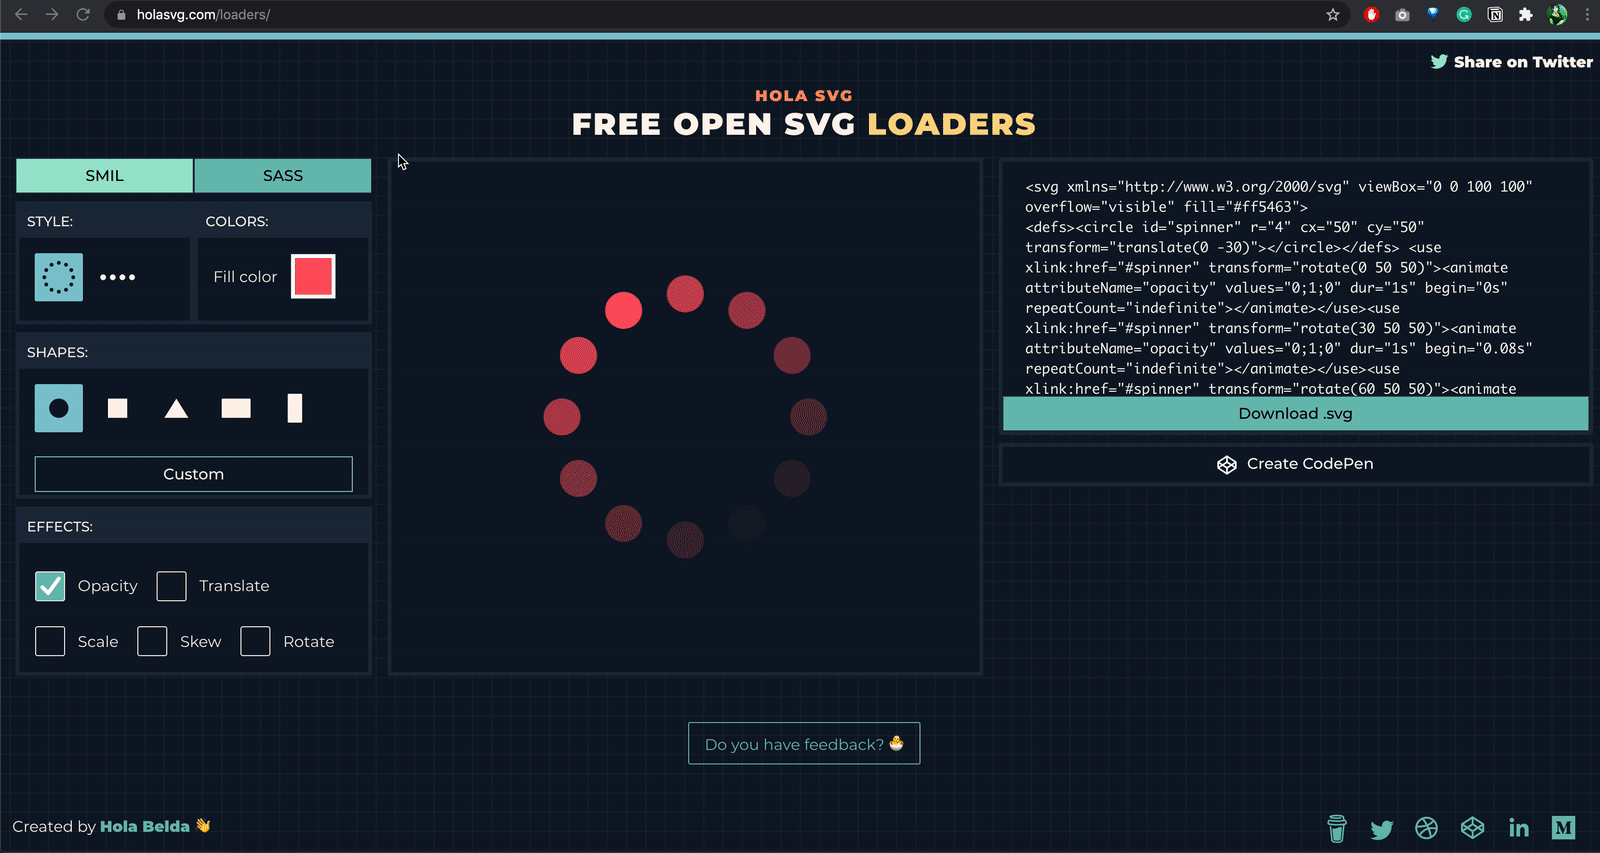 How I Made a Generator for SVG Loaders With Sass and SMIL Options